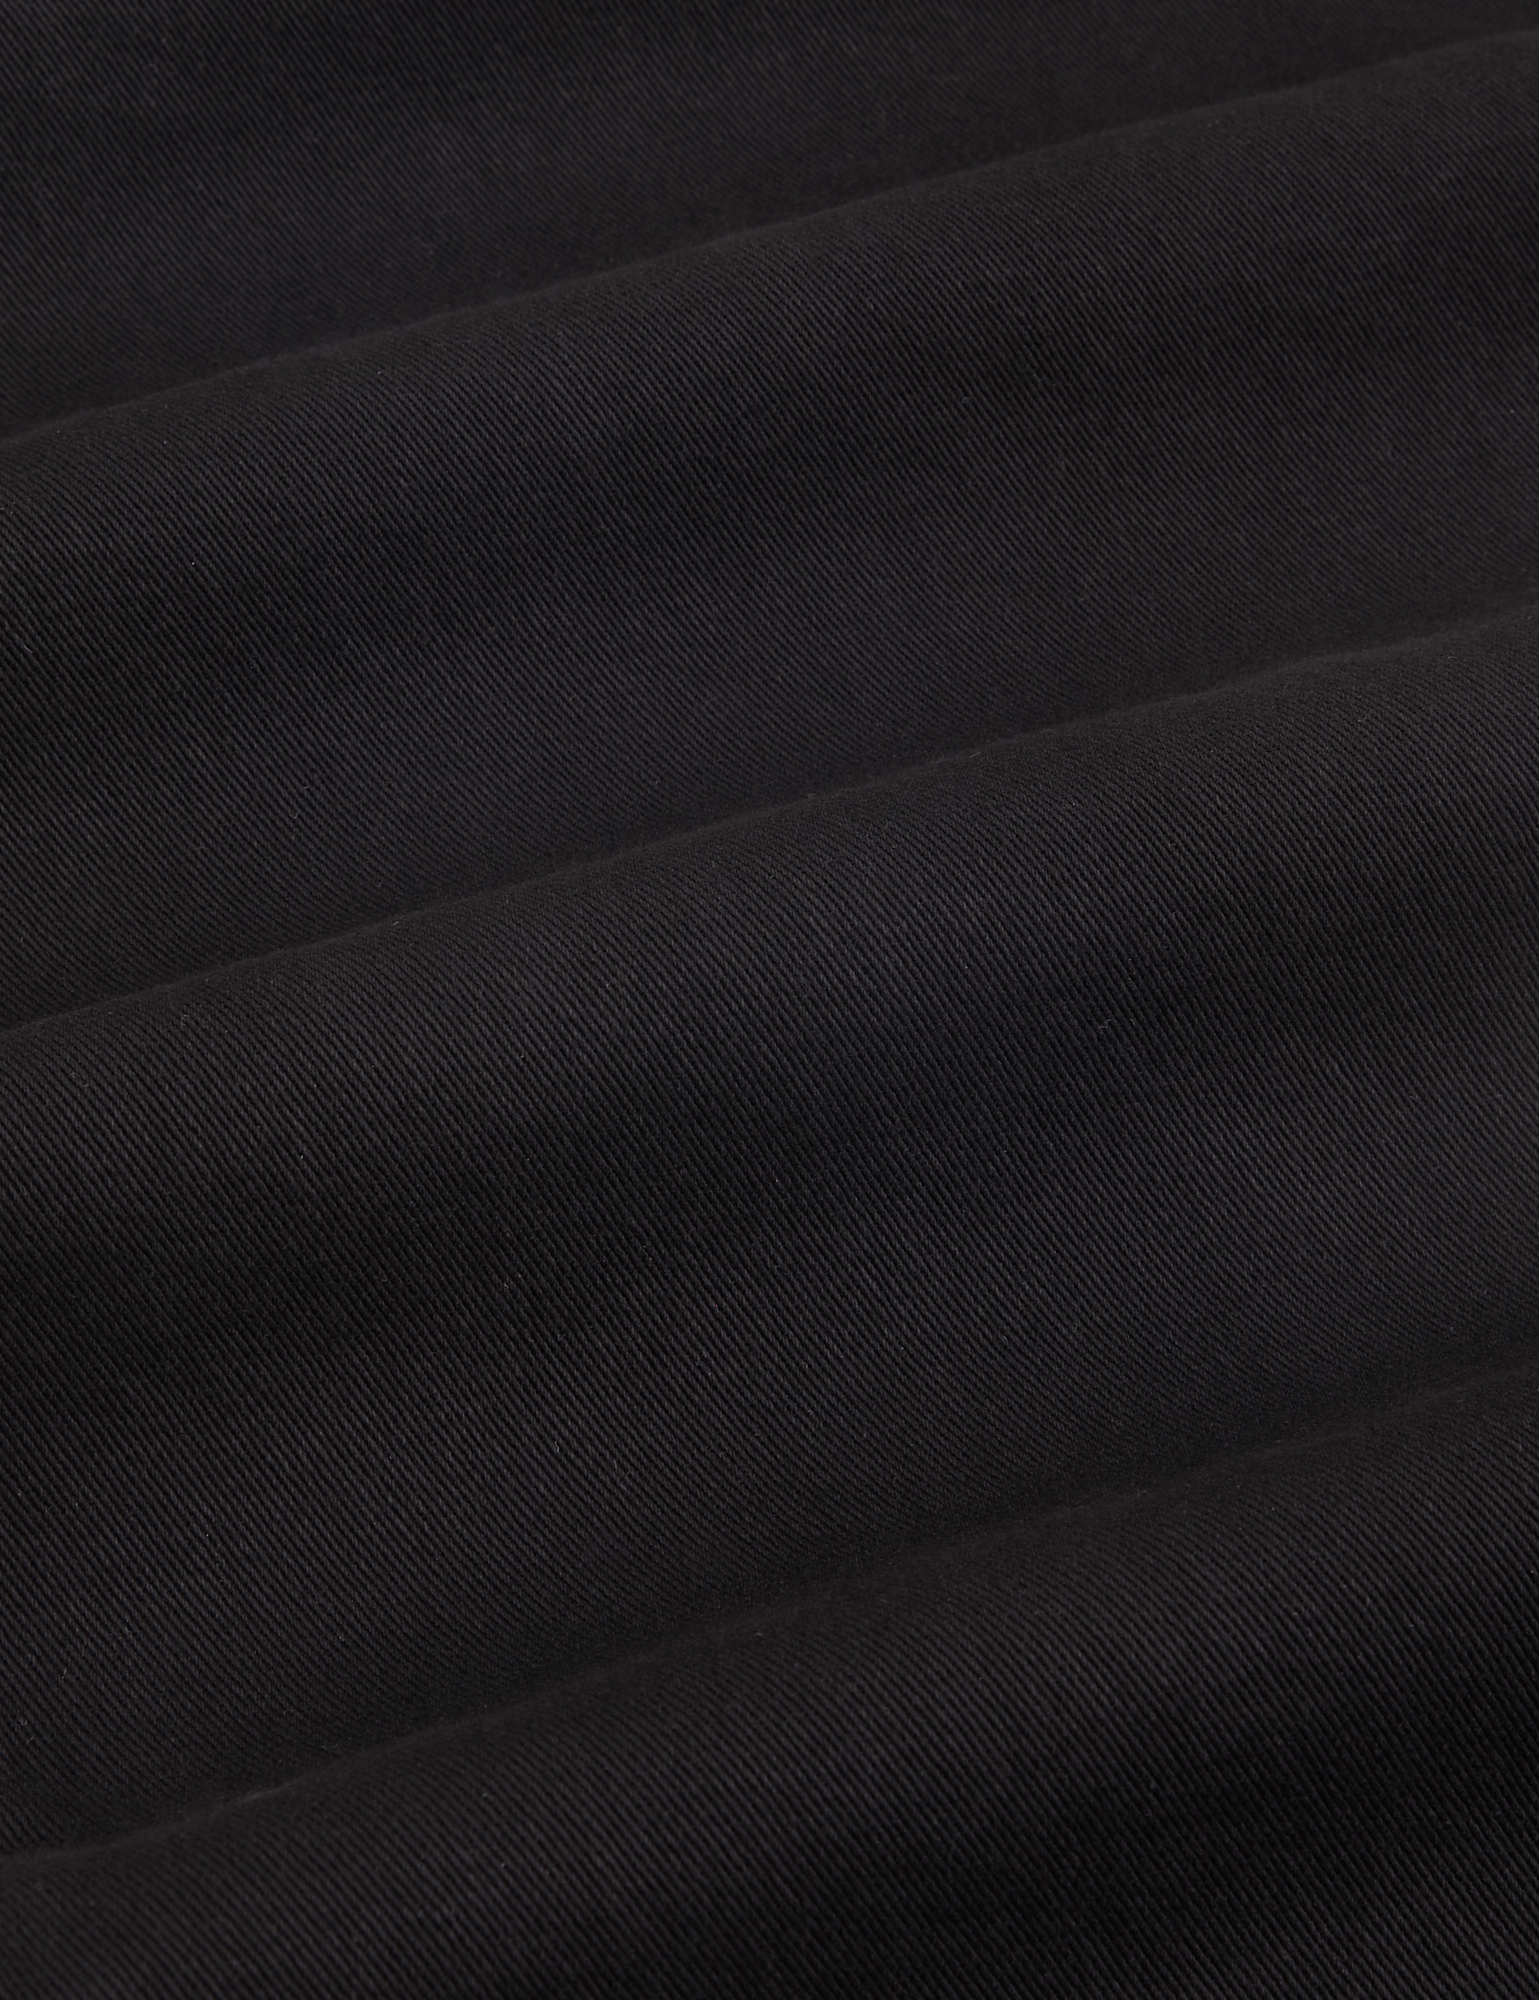 Heavyweight Trousers in Basic Black fabric detail close up.